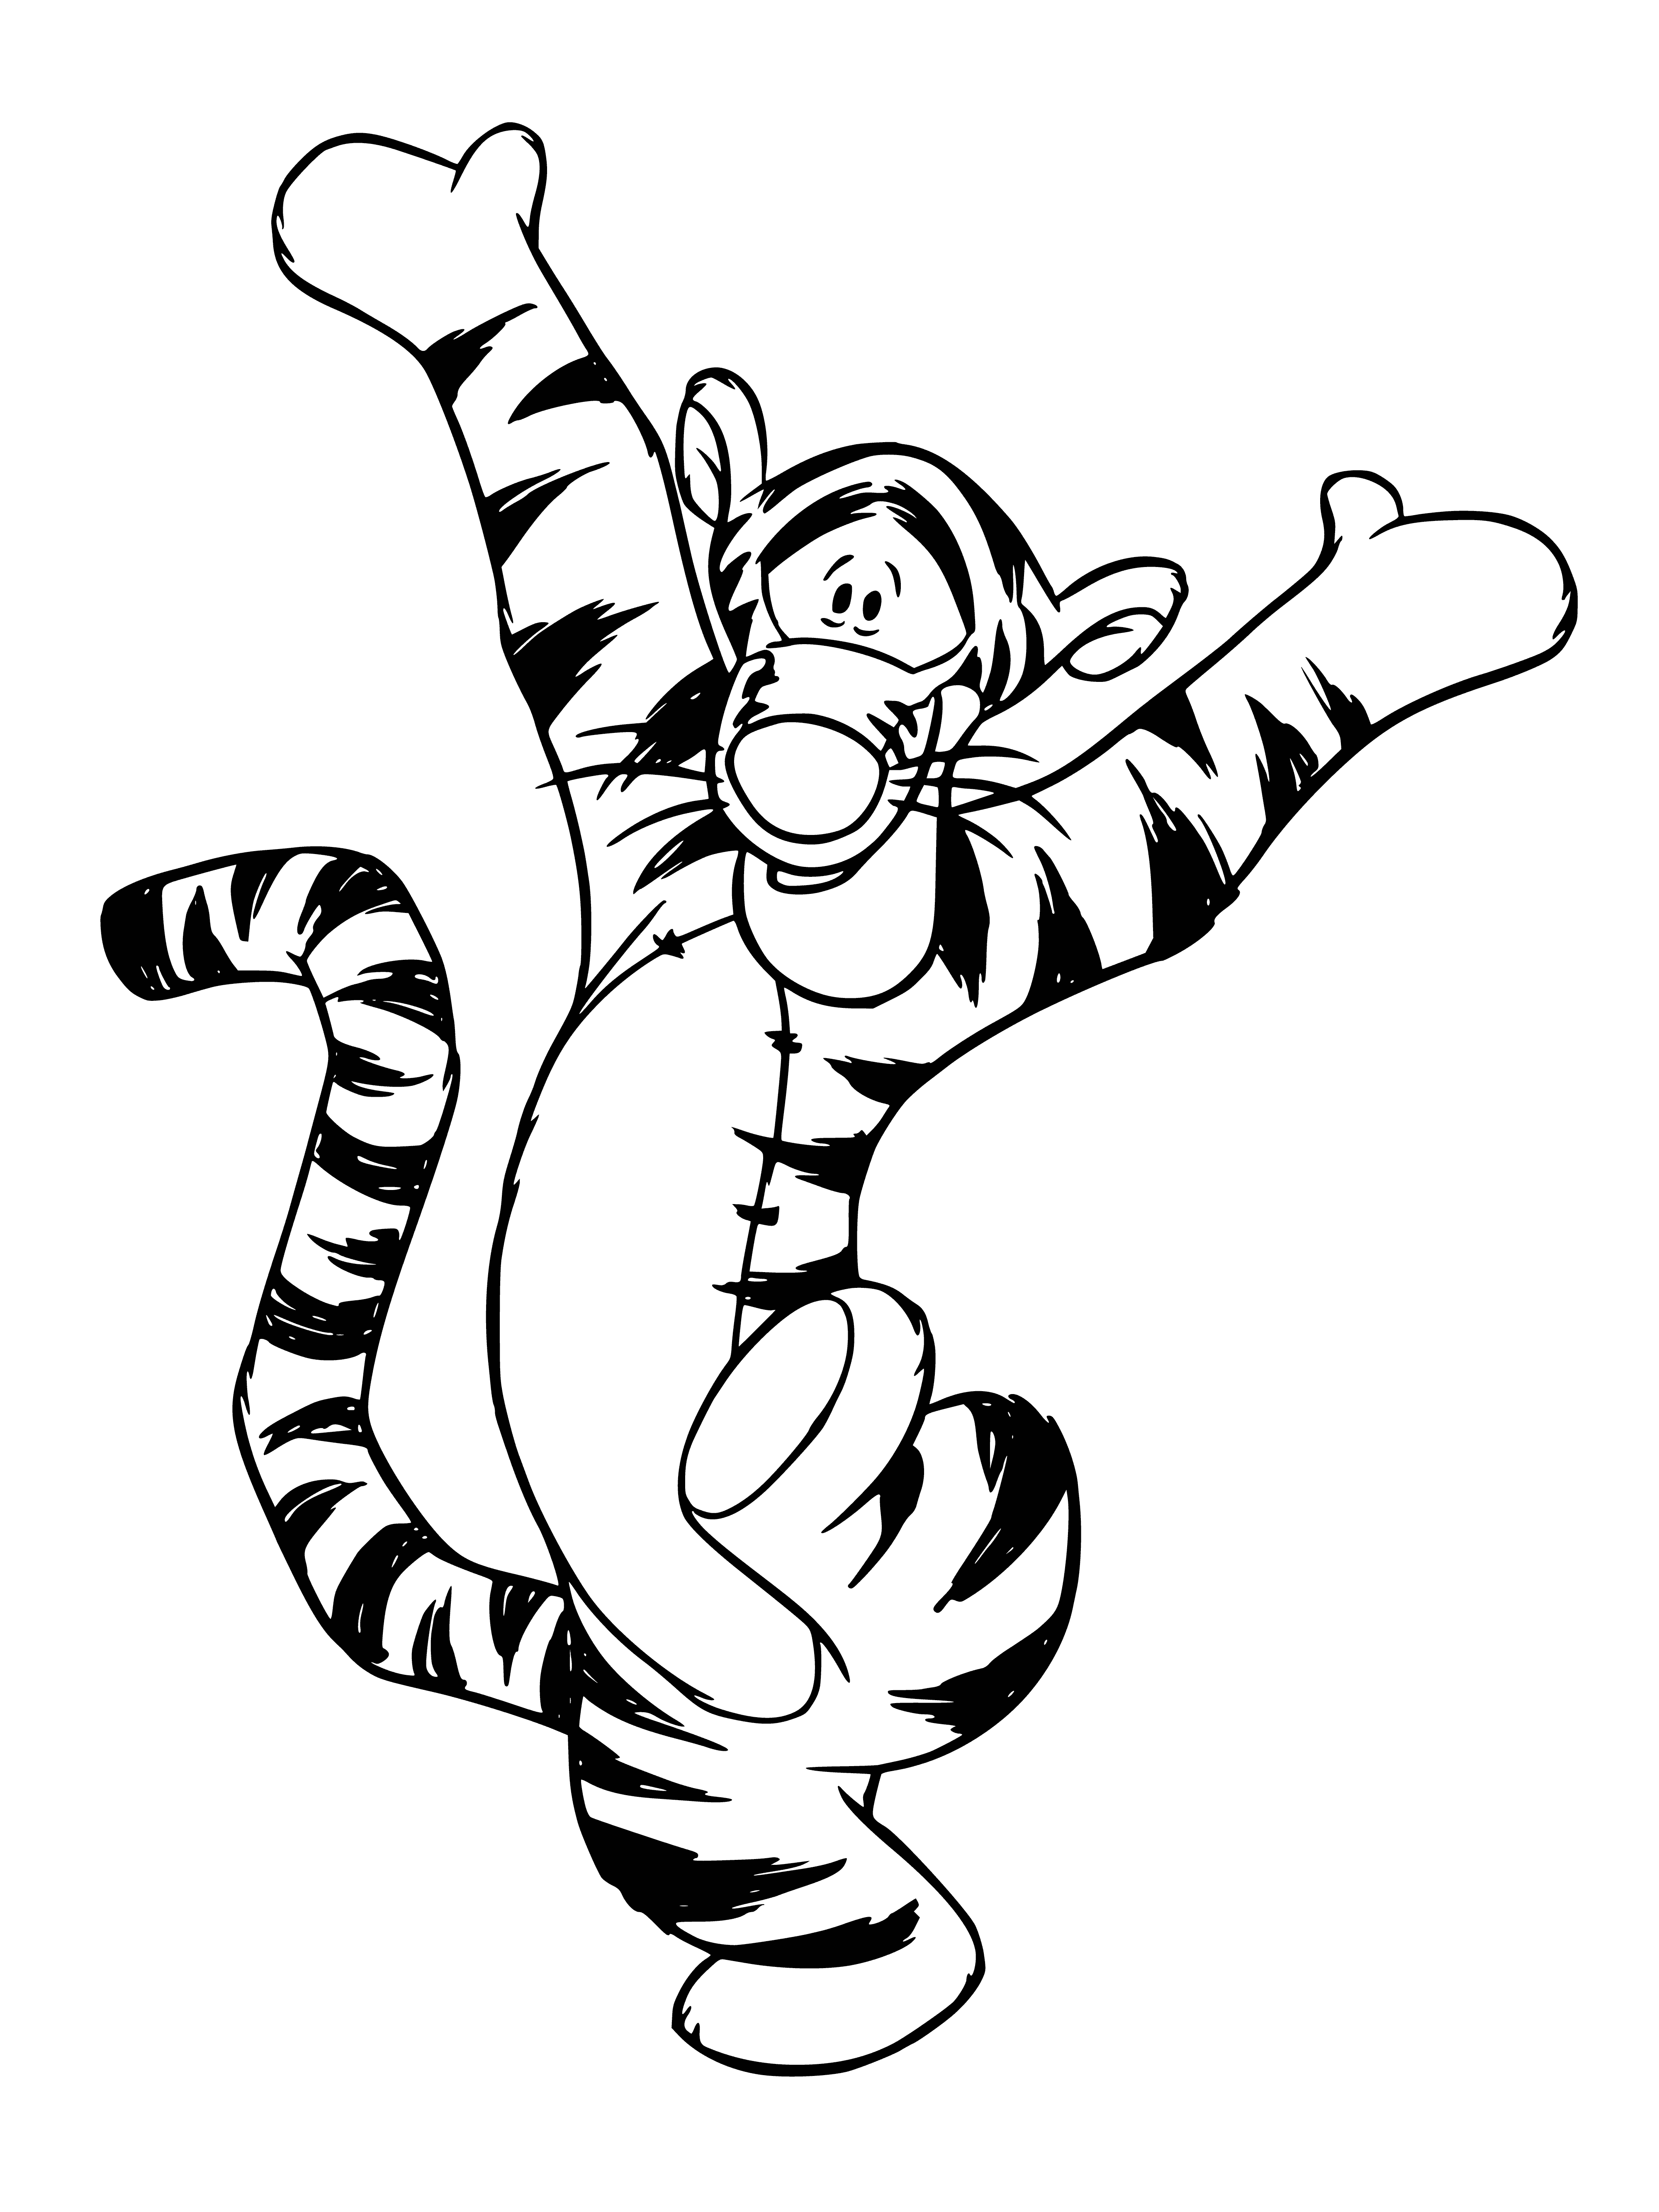 coloring page: Tiger cub with orangefur, black stripes, whitebelly & pointy ears looks at camera with green eyes in the jungle.